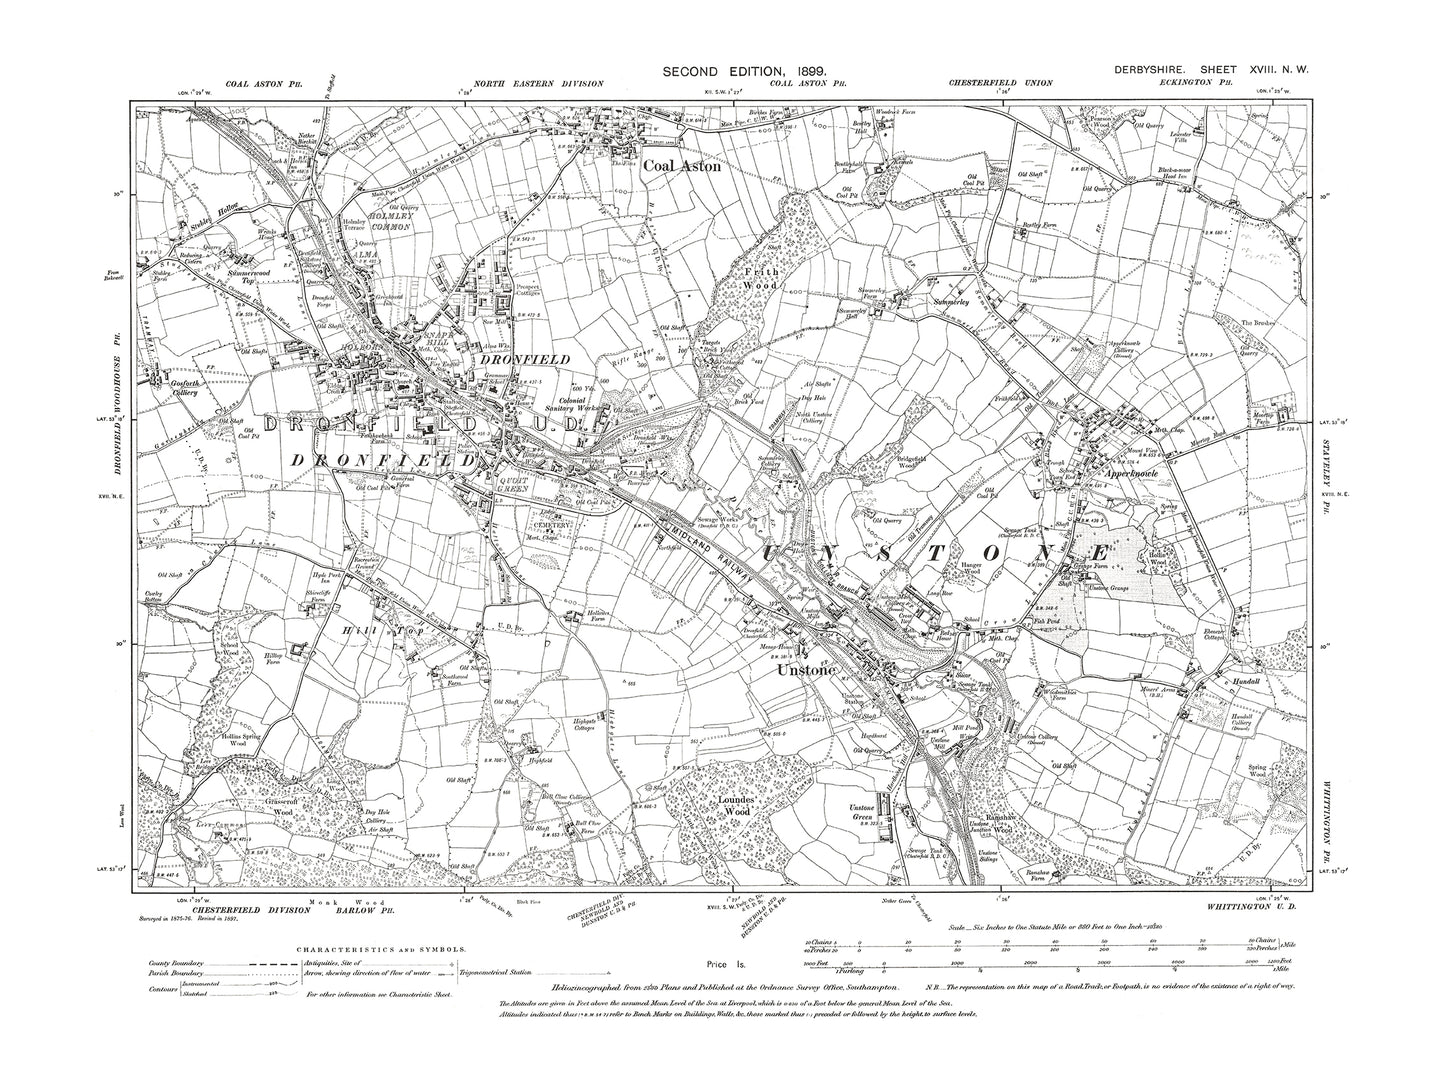 Old OS map dated 1899, showing Dronefield, Unstone, Coal Aston in Derbyshire 18NW